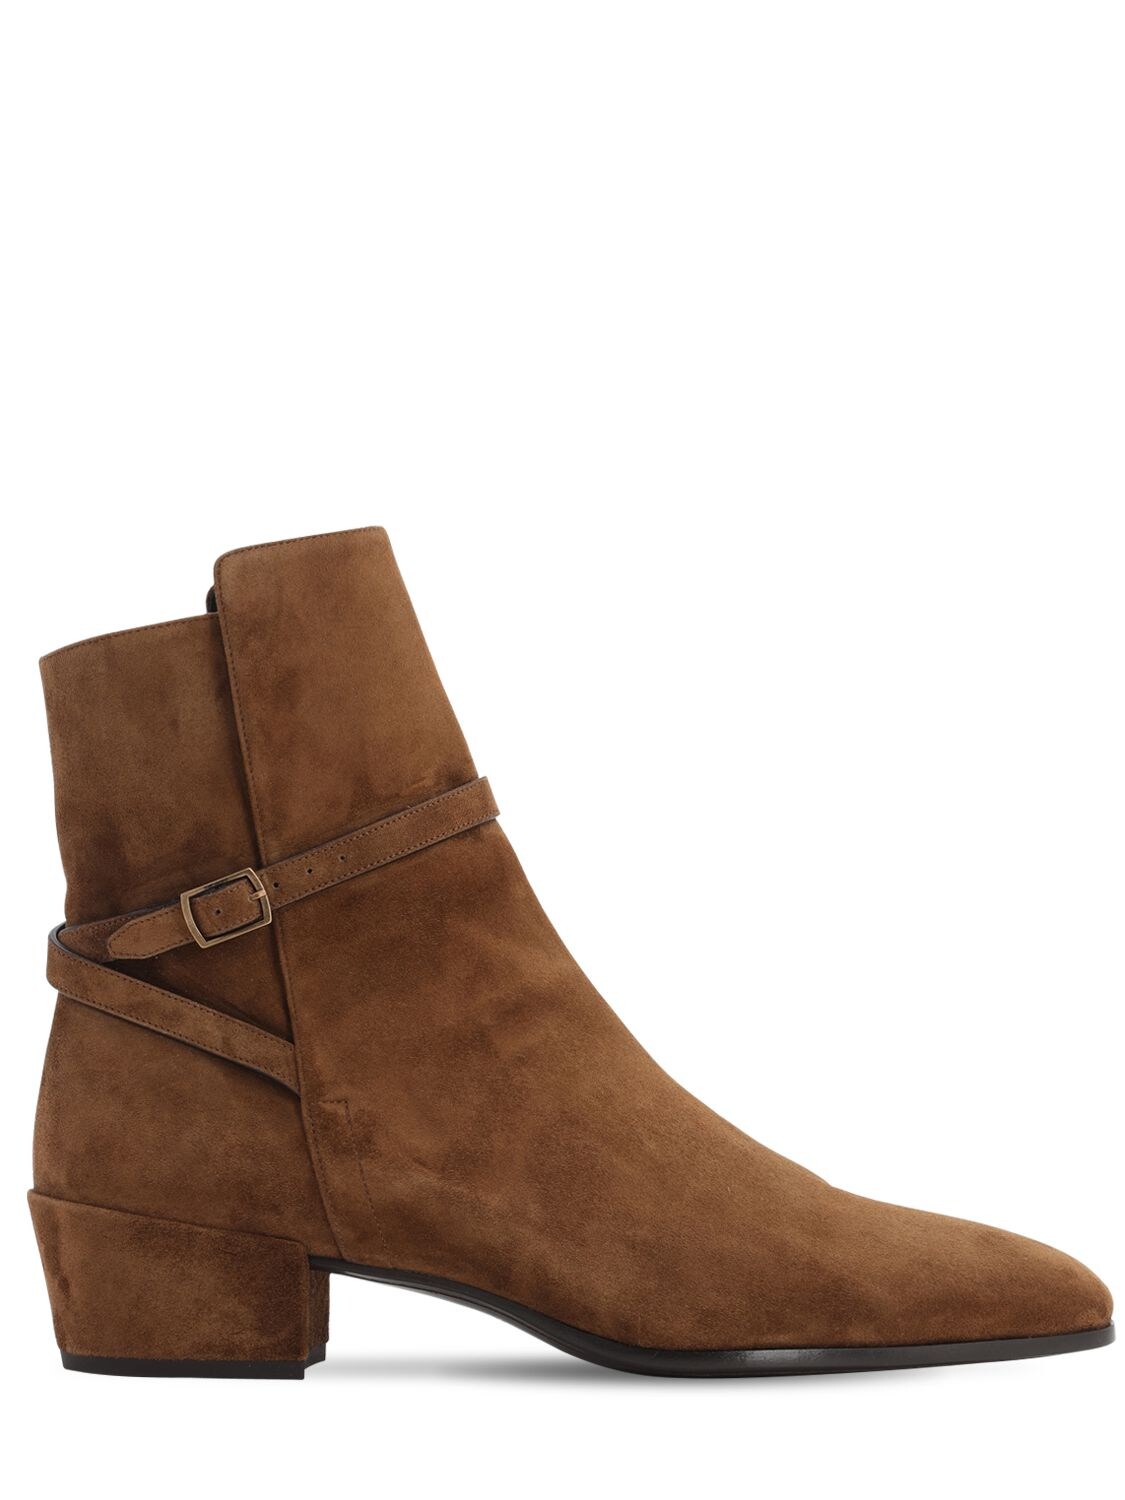 Saint Laurent 40mm Clementi Suede Boots W/ Strap In Brown